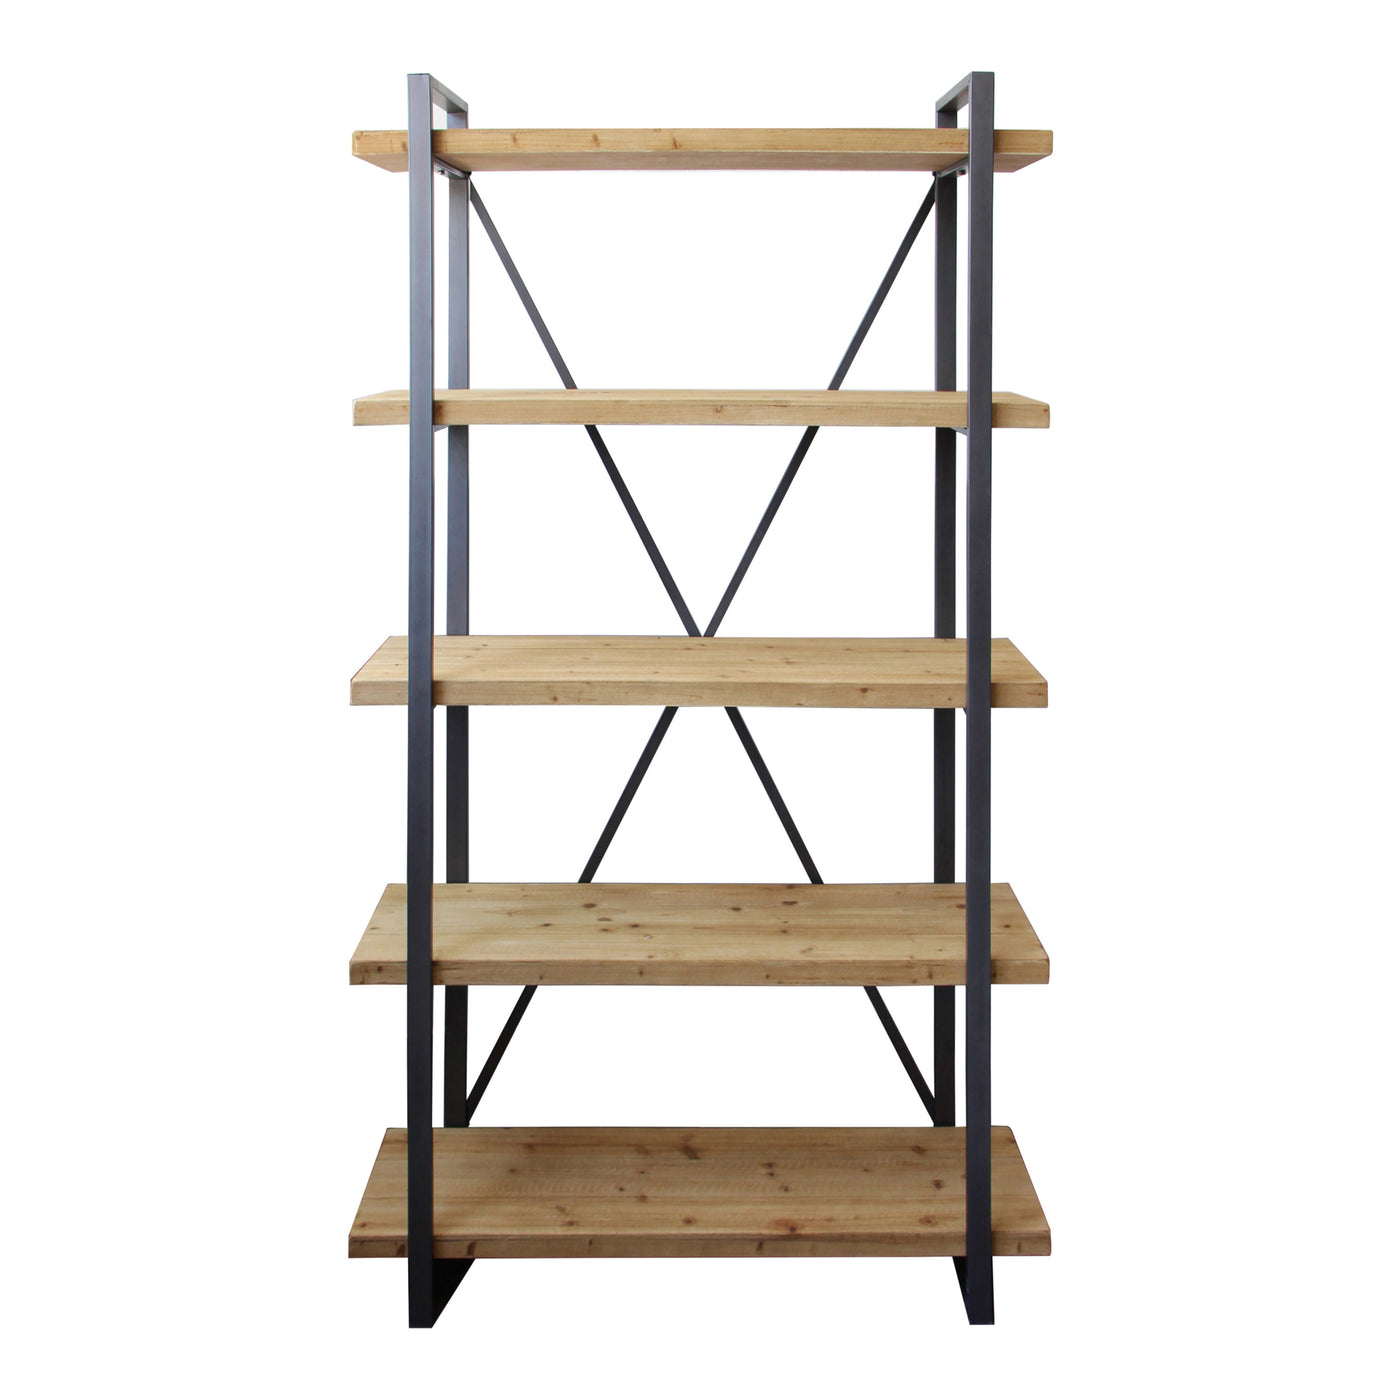 Storage has never been easier with the Lex 5 Shelf. Whether you are using the LEX as a bookshelf or a display case, its ir...